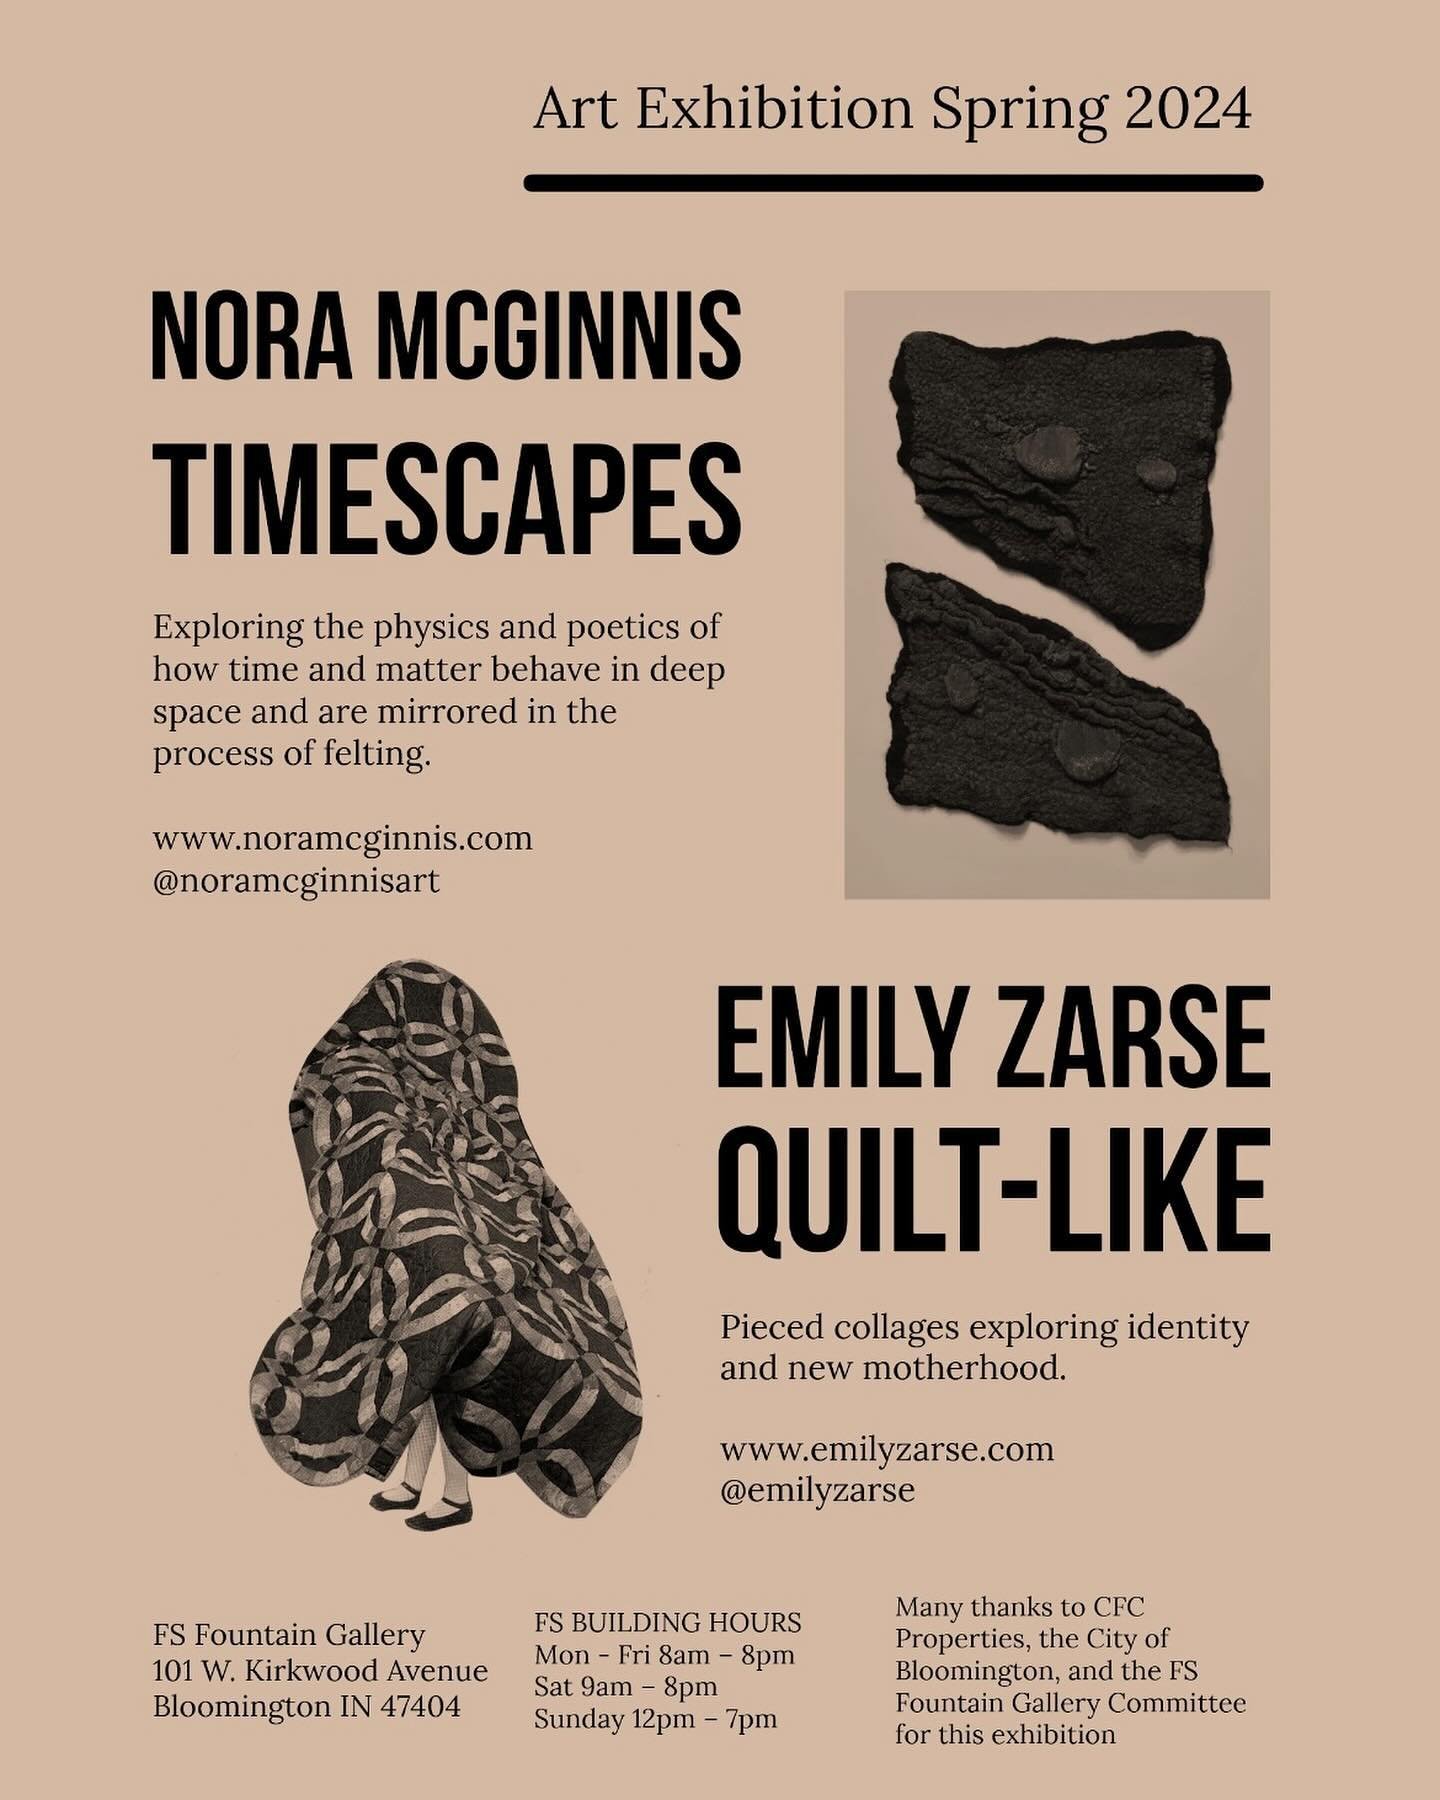 If you&rsquo;re in Bloomington this Friday I have two shows open!! So excited to have work alongside my friend and talented artist @noramcginnisart and show in this lovely local gallery space. Many thanks to the Fountain Square Gallery and team, the 